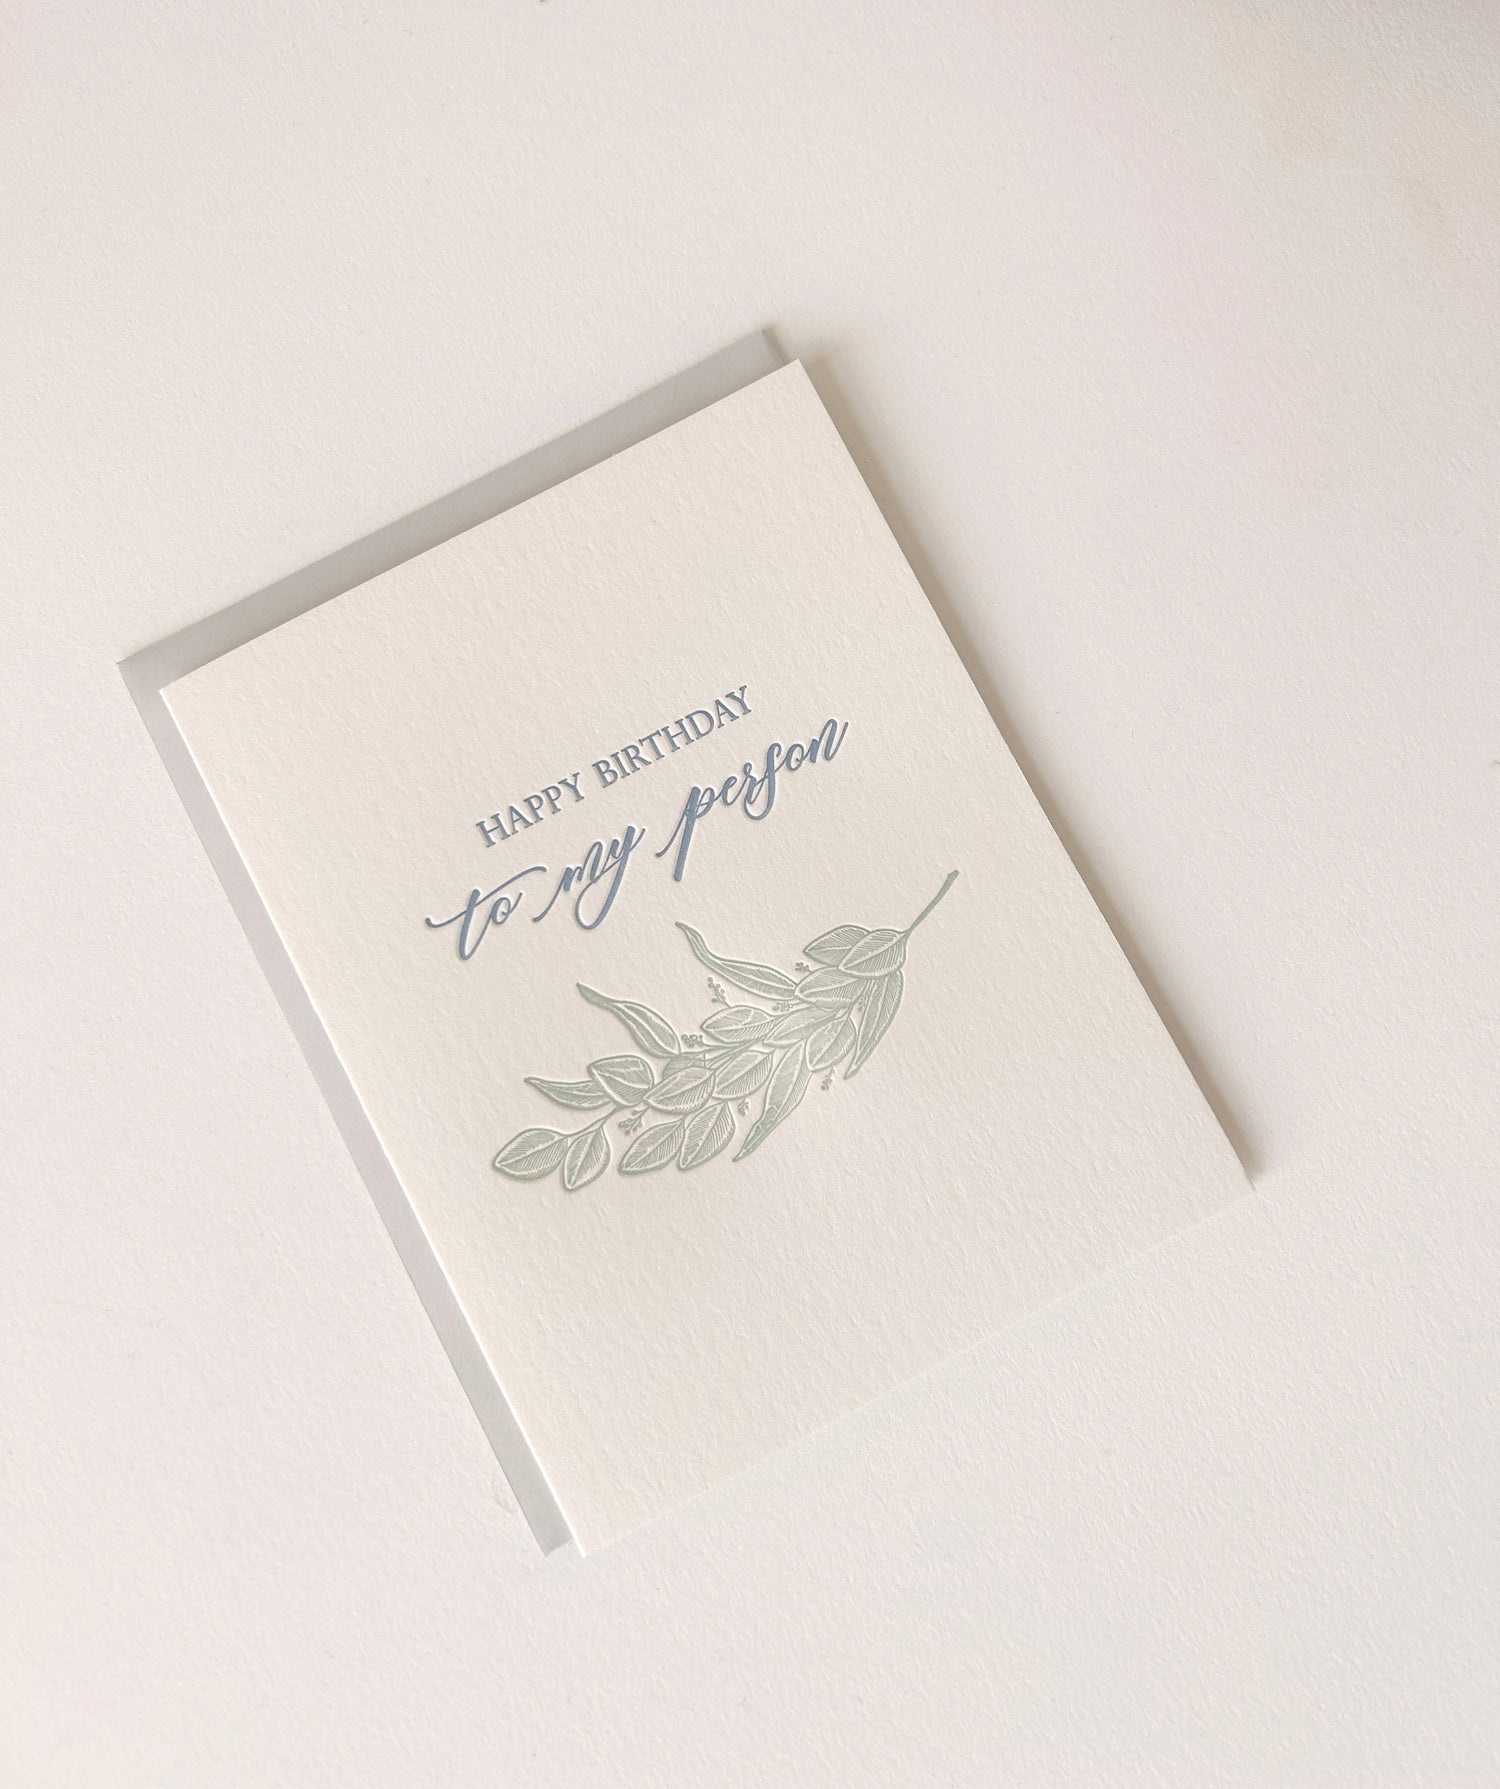 Letterpress birthday card with greenery that says "Happy Birthday To My Person" by Rust Belt Love